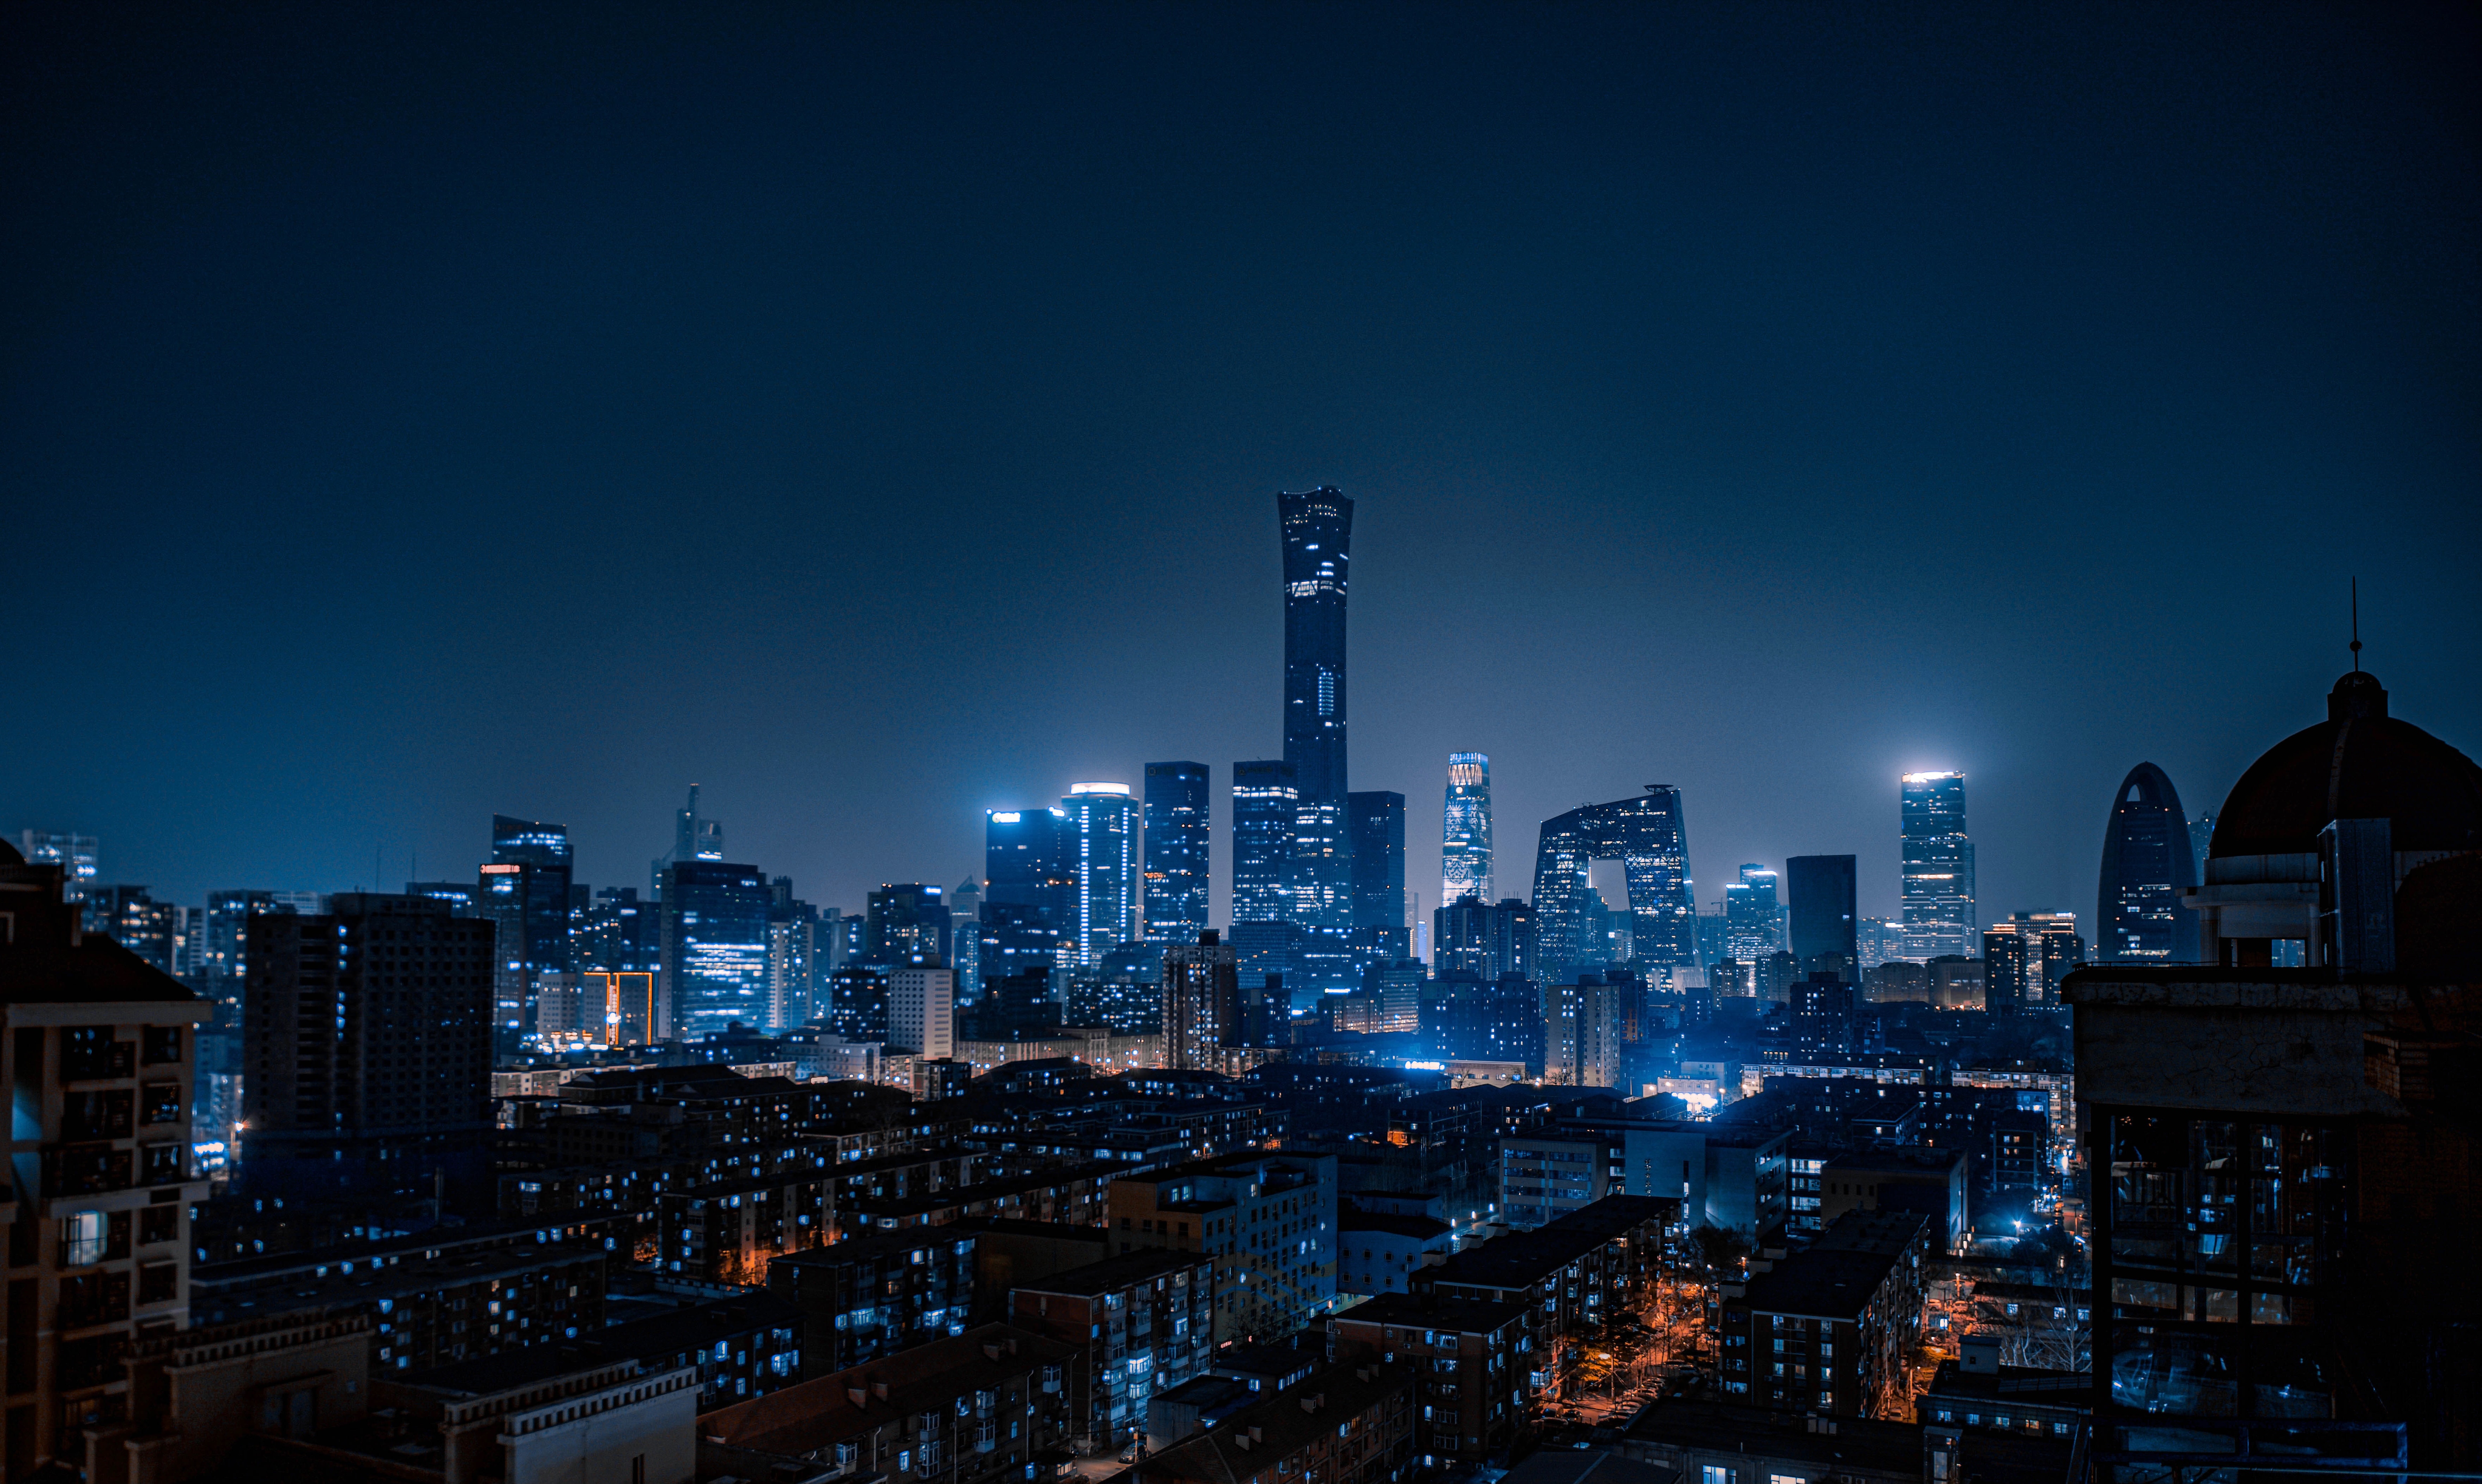 night, view from above, cities, city, building, lights, china, beijing Image for desktop